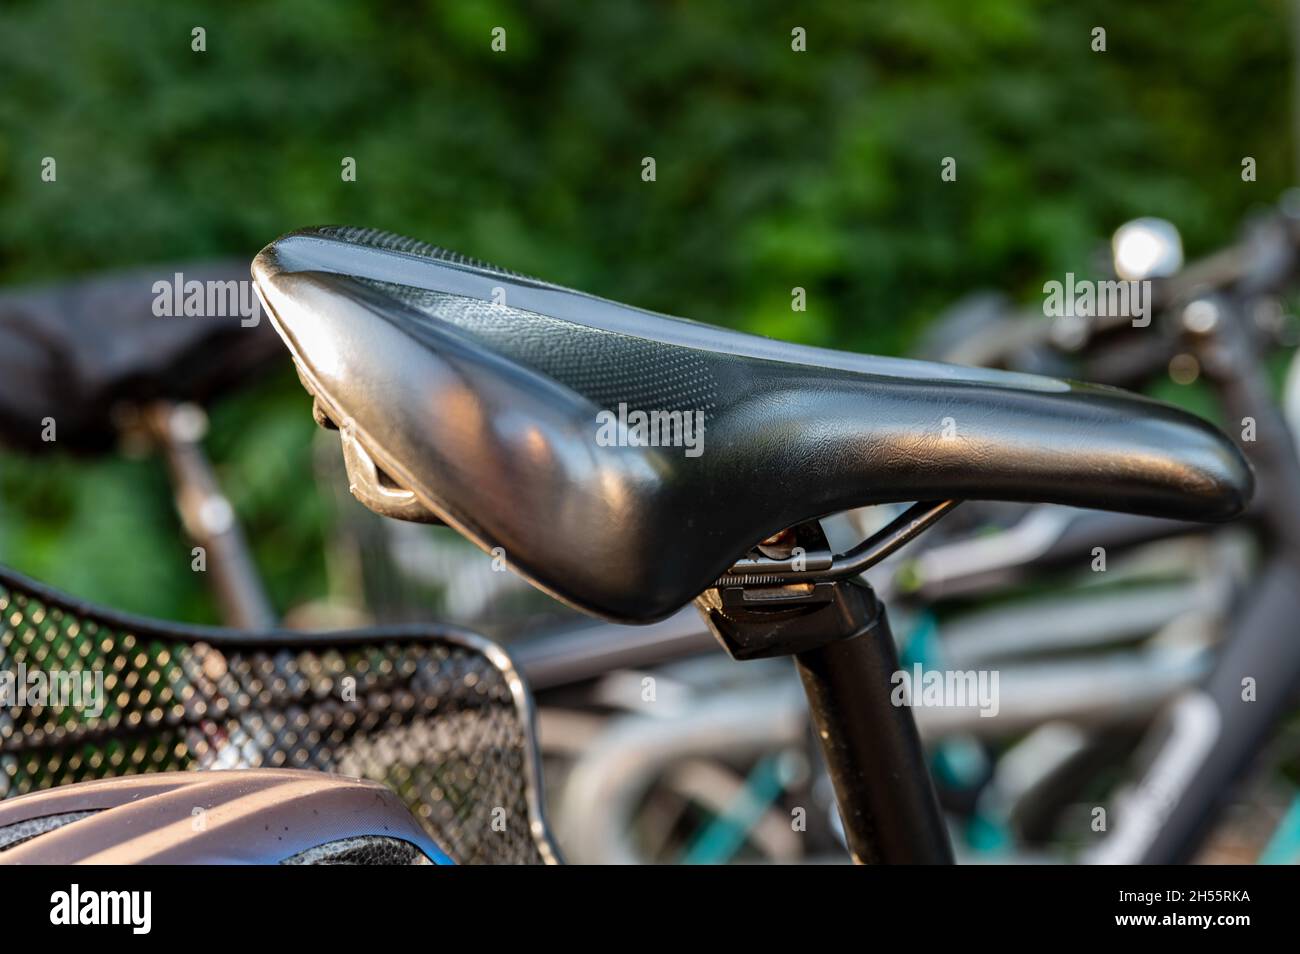 Close-up of bicycle saddle on an attached bicycle Stock Photo